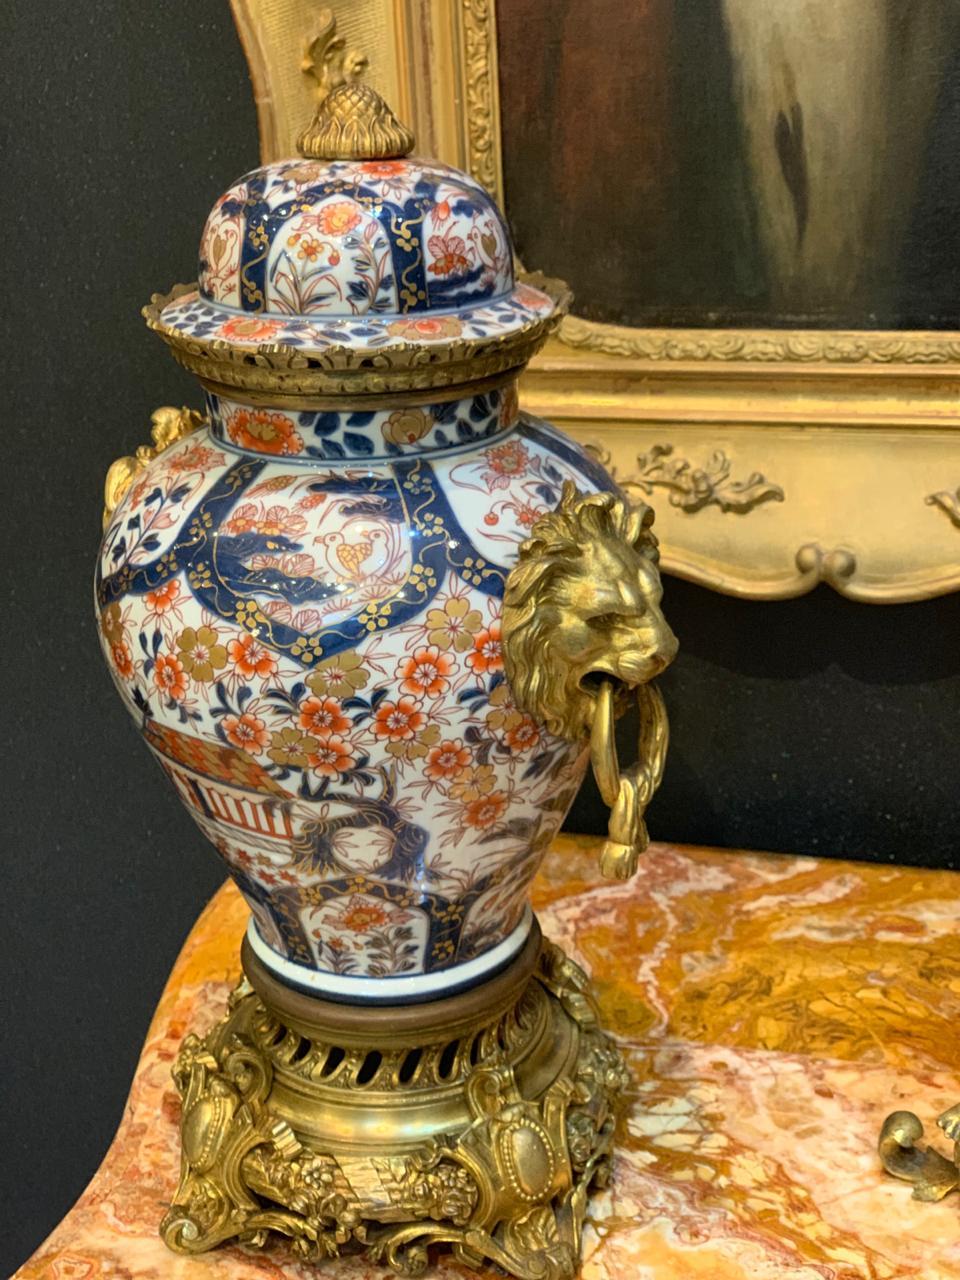 A very fine Napoleon III polychrome porcelain fireplace garnish with floral decoration. Ornamentation in gilded bronze of 